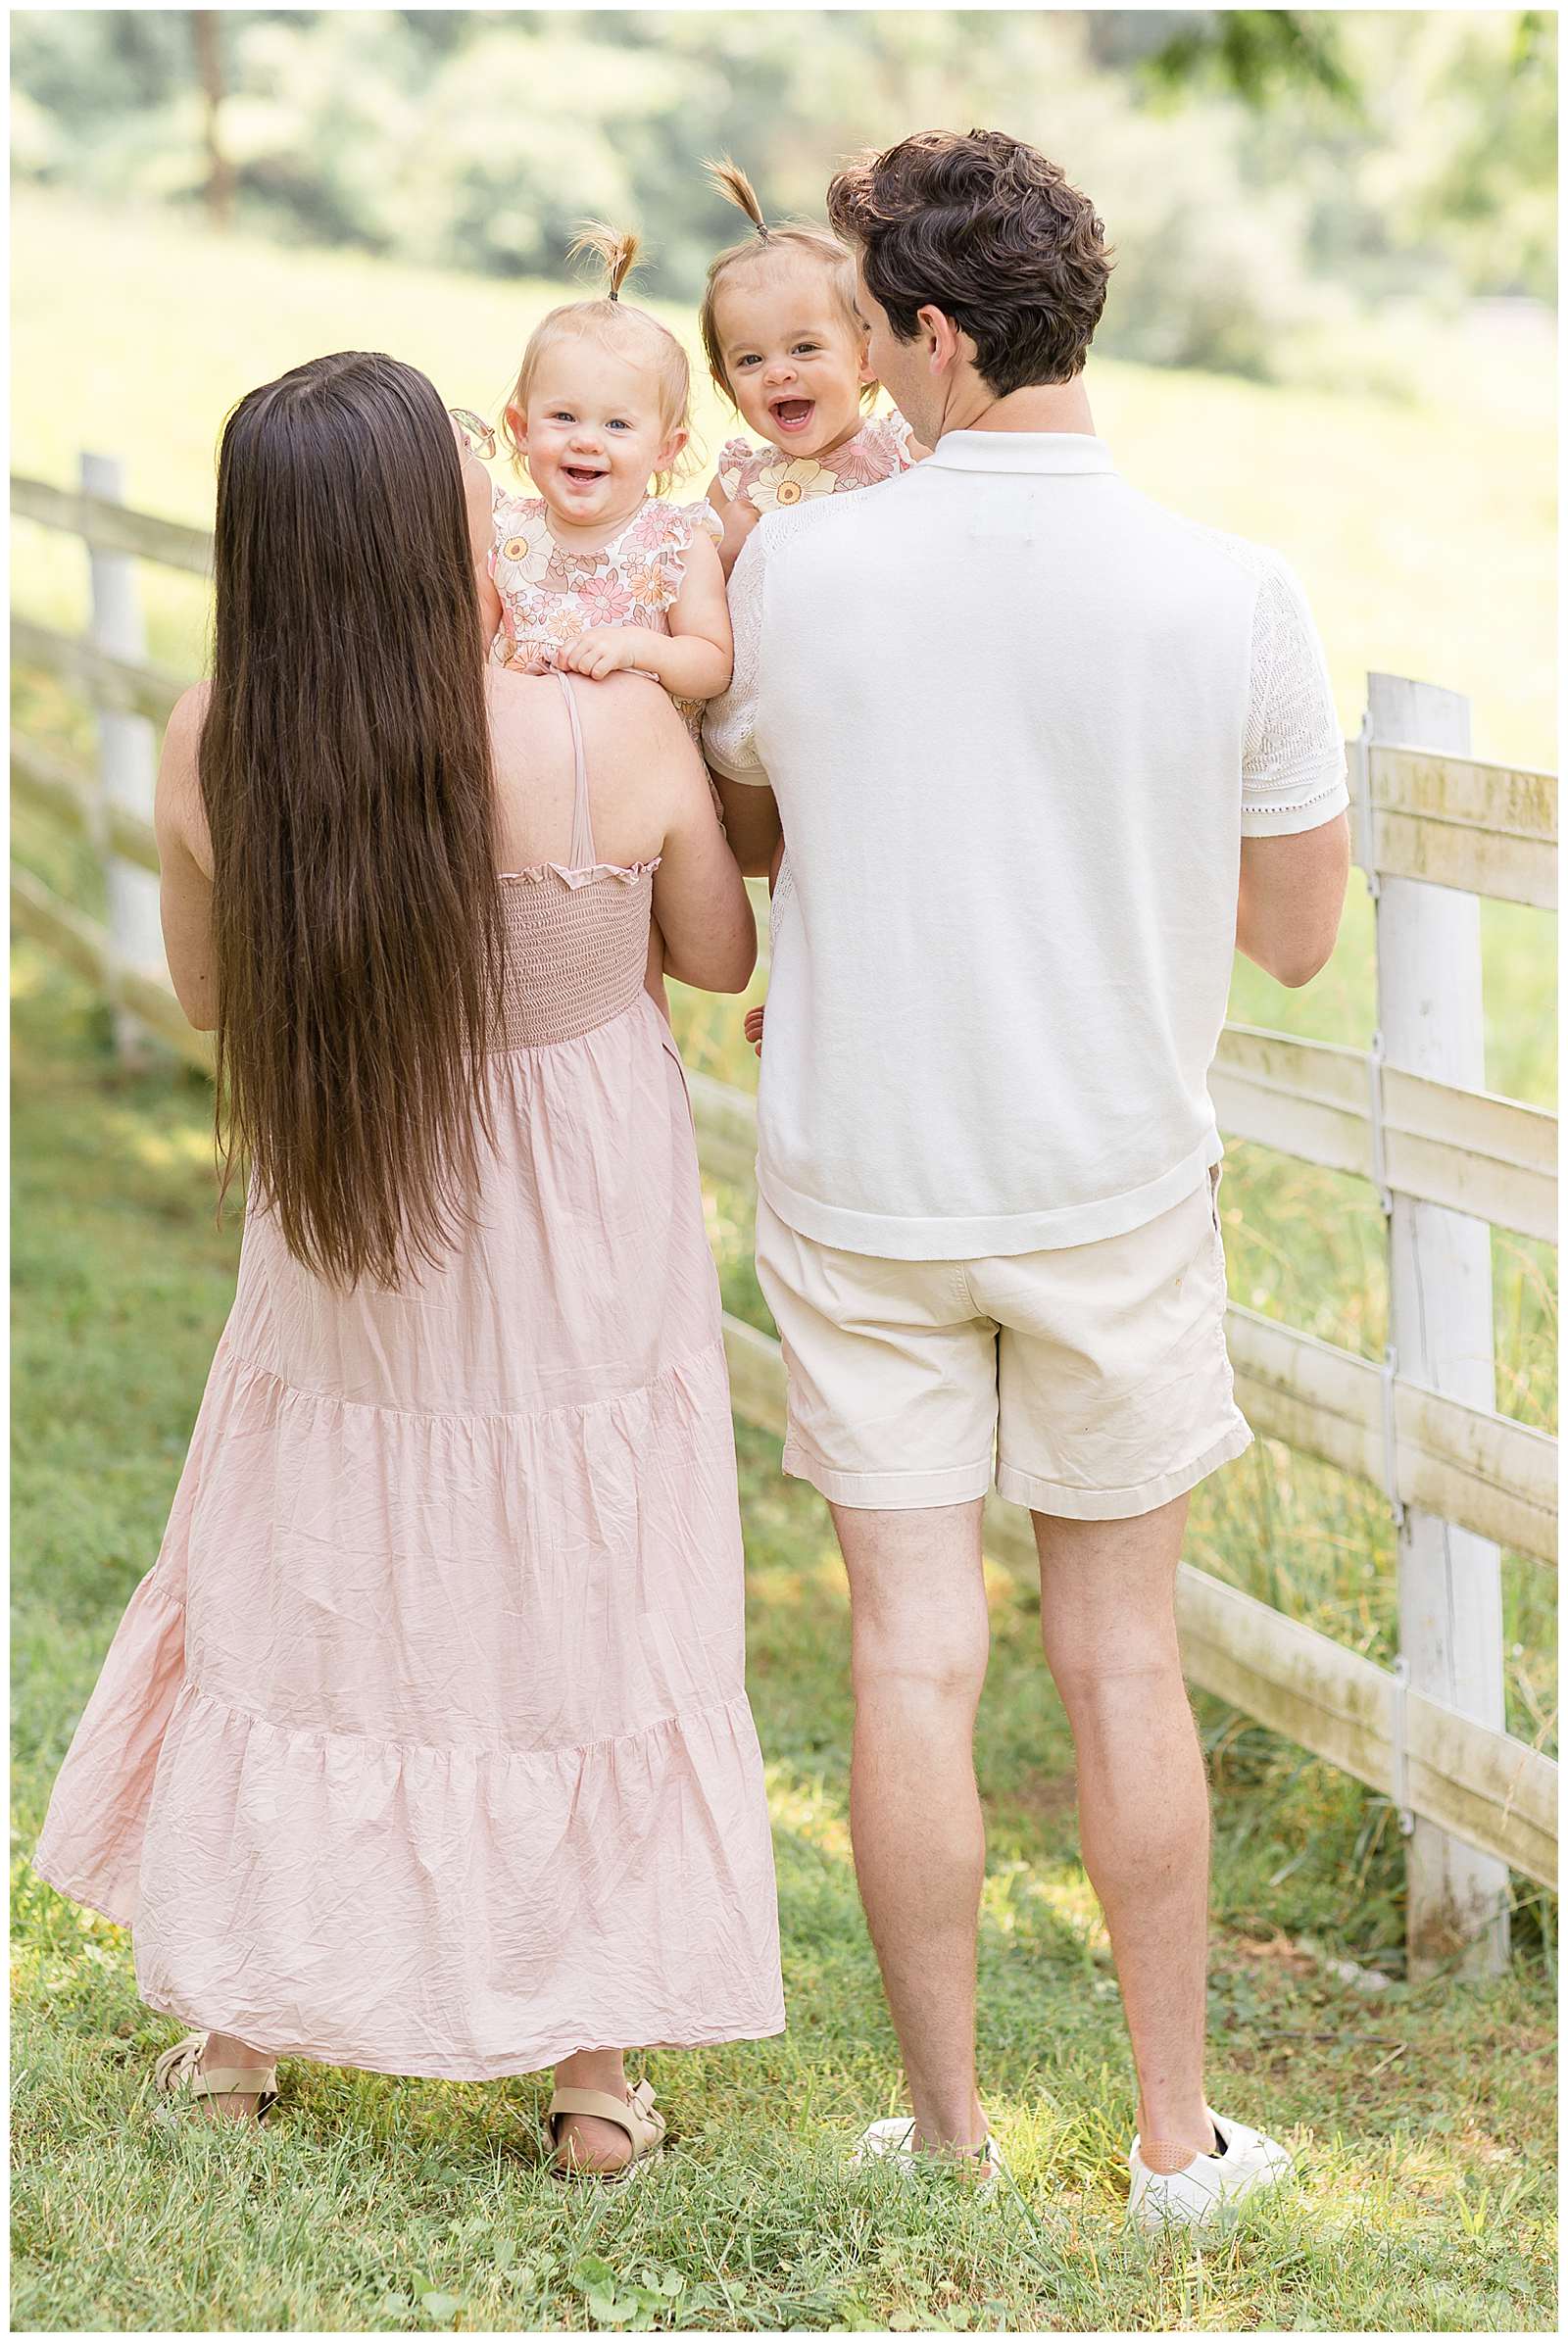 1 year old twins are held but their Mom and Dad who hold them over their shoulders and the twins look back and smile at Rebecca Rice Photography. They coordinate in outfits with blush, muted pinks, and white colors. -rebeccaricephoto.com